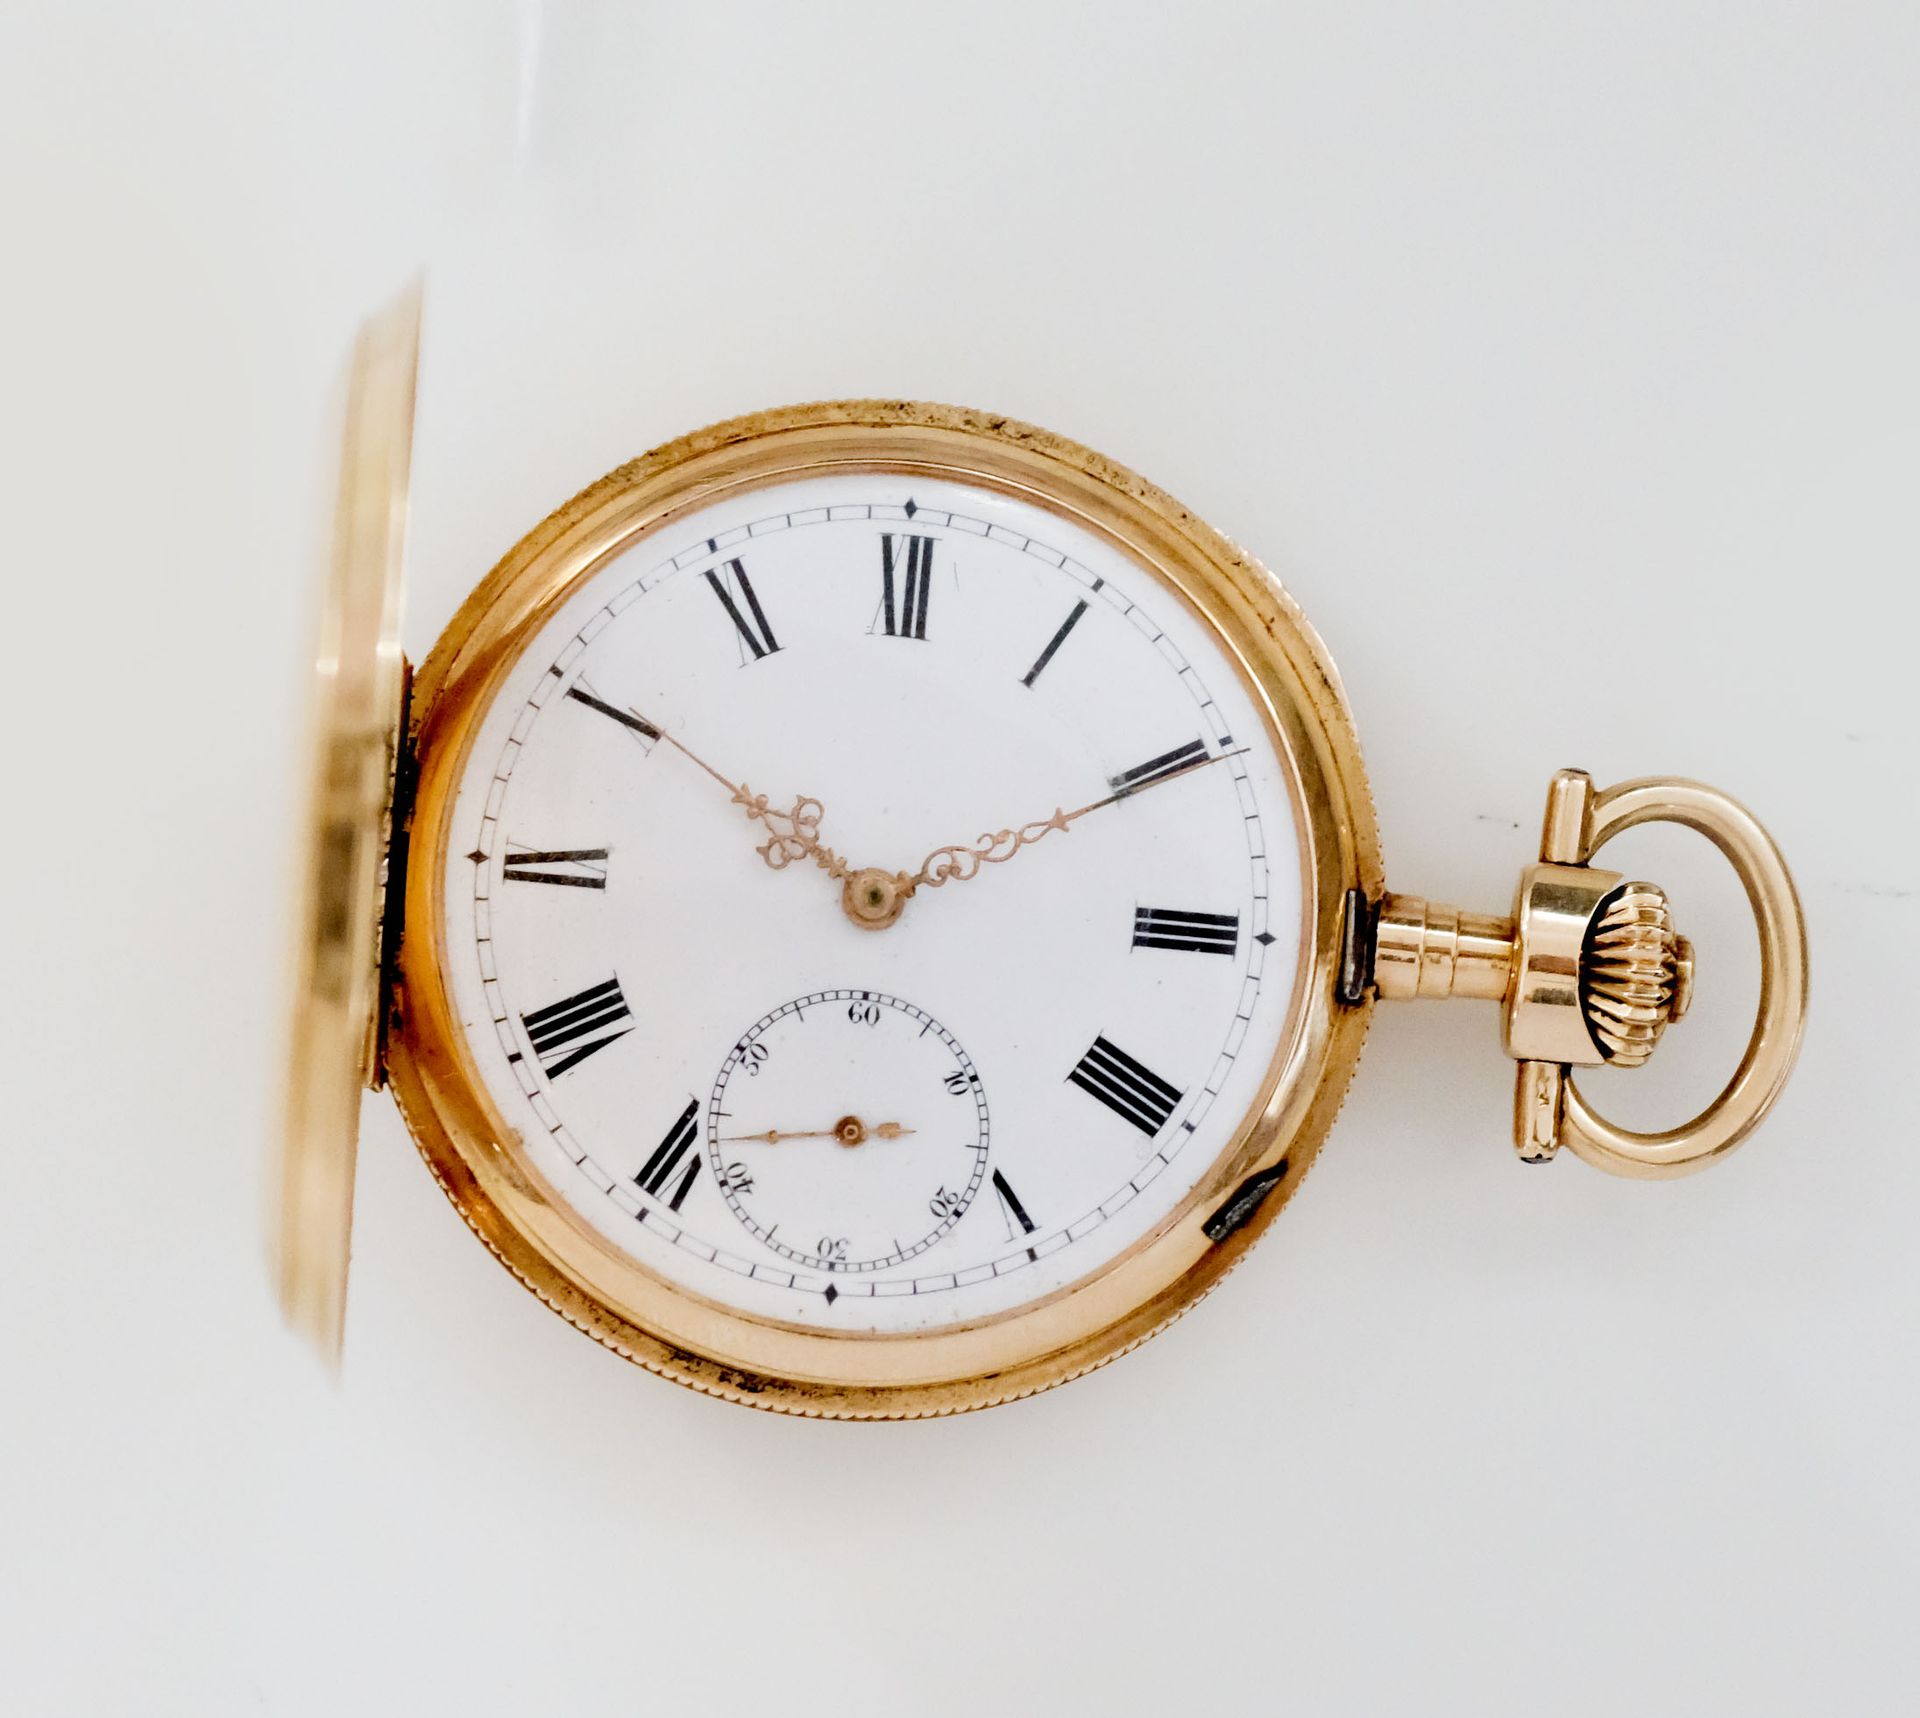 ANONYME vers 1900 
N° 502011
14k (585) gold savonnette-type pocket watch, white &hellip;